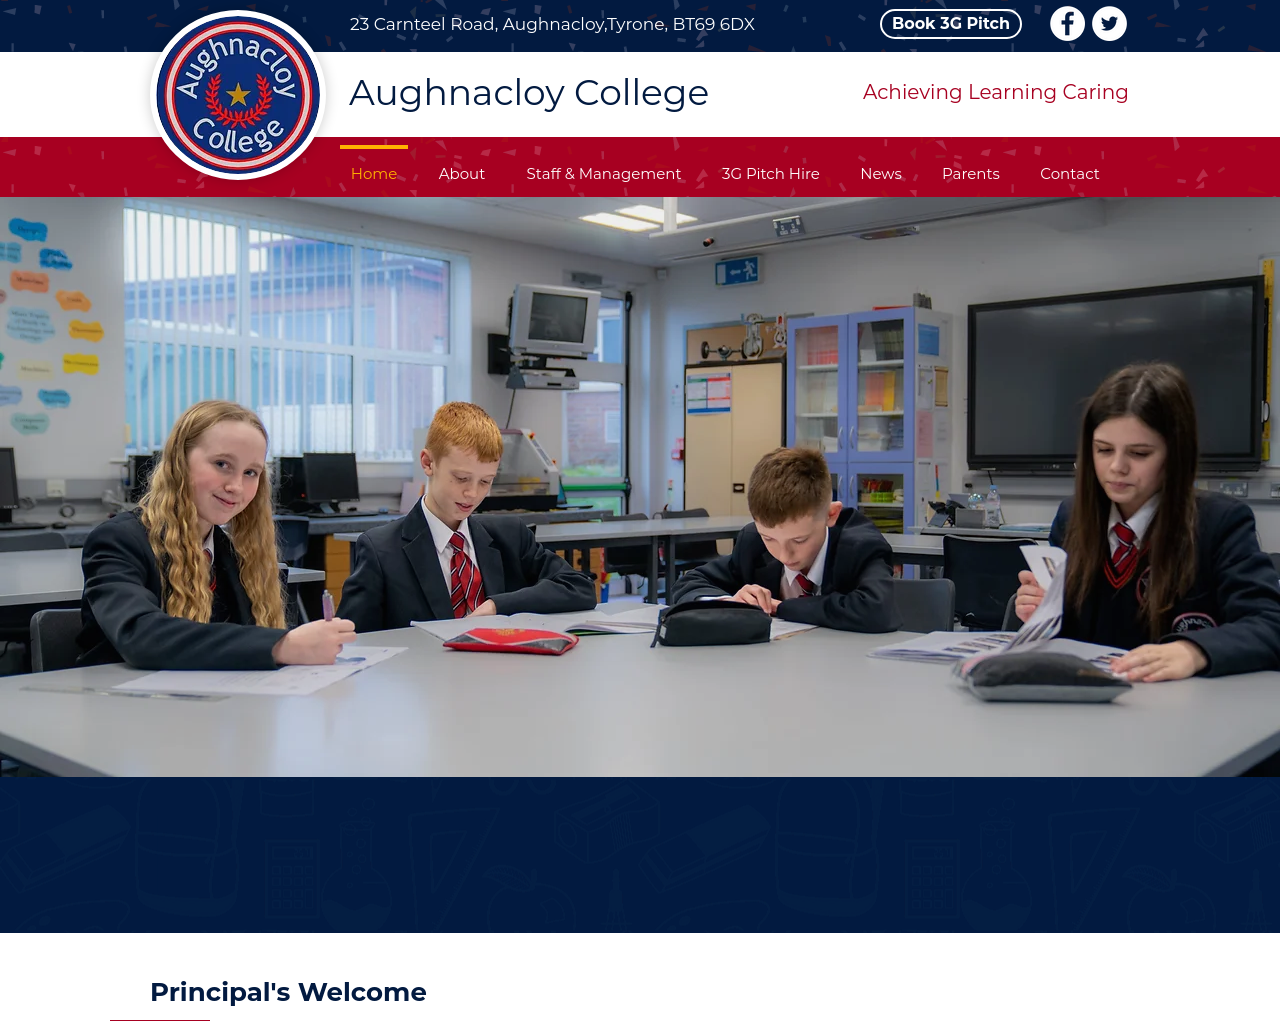 Aughnacloy College